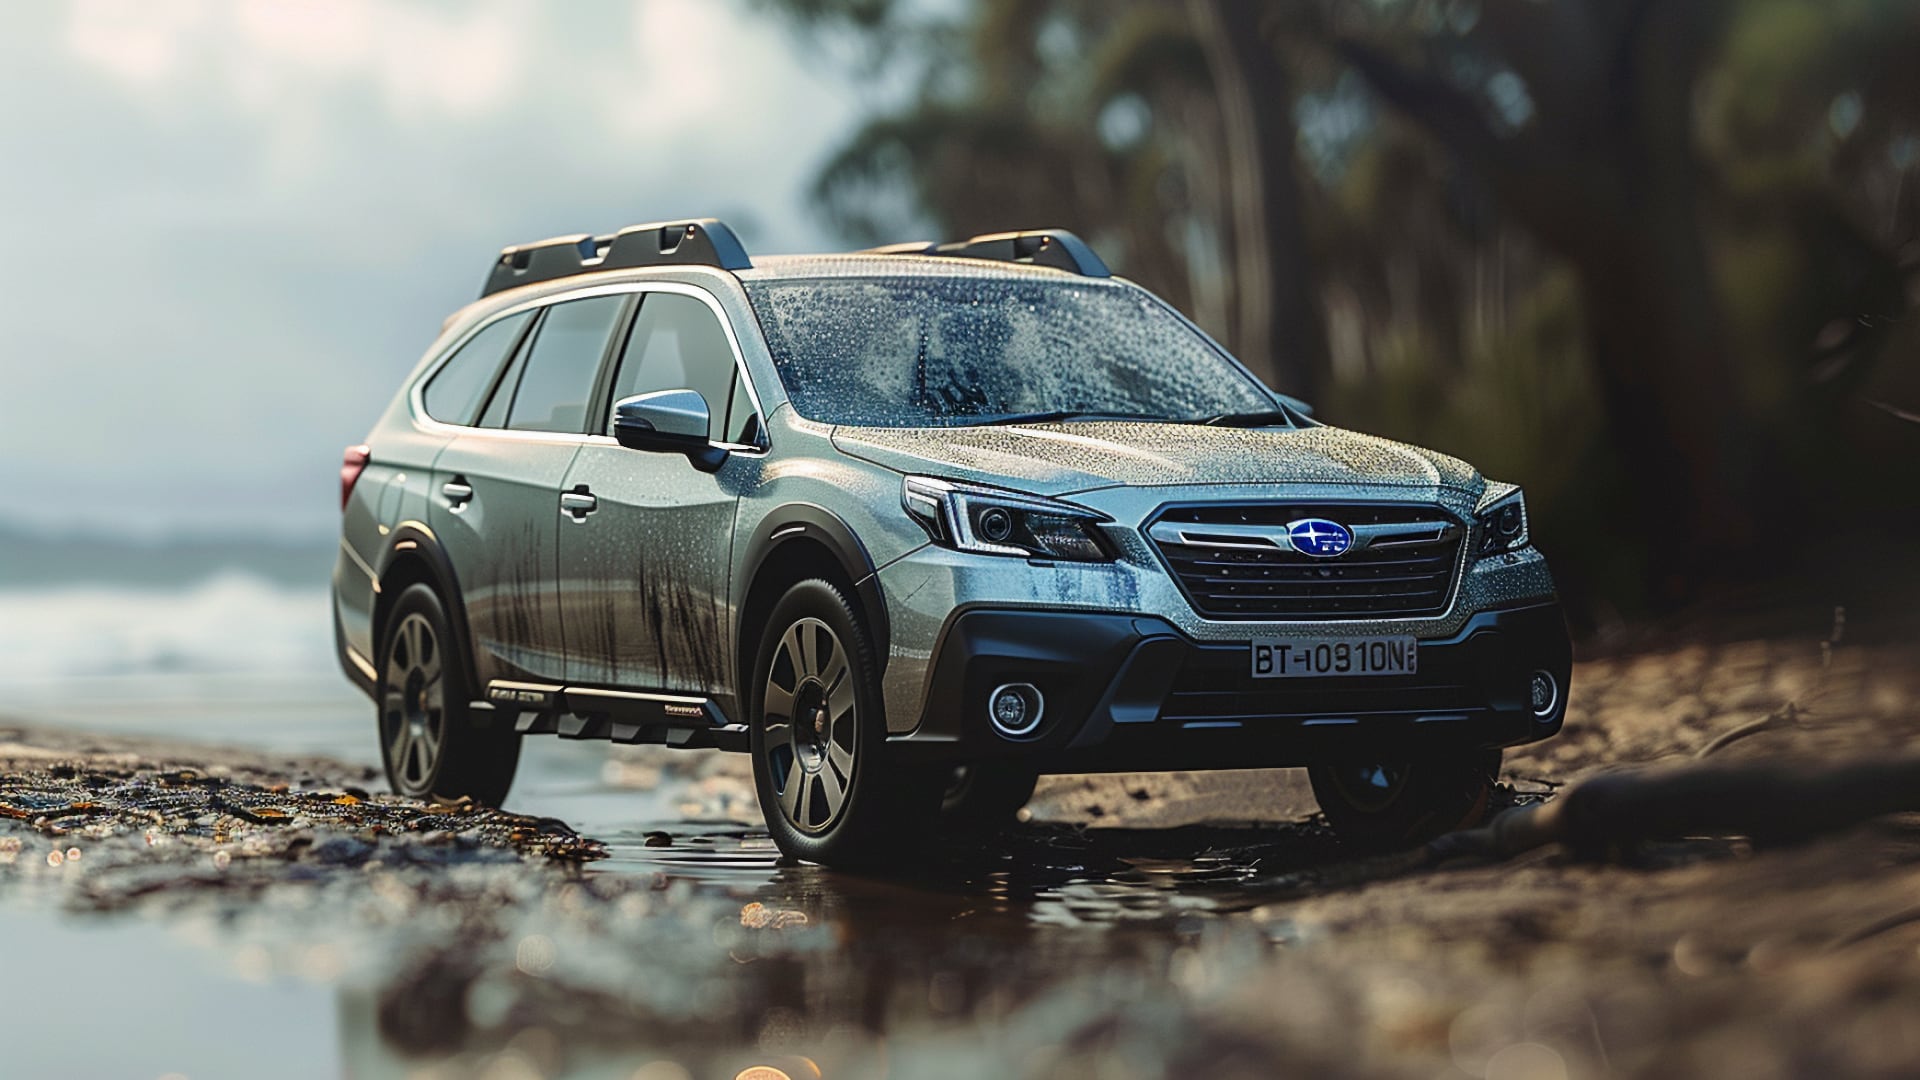 The 2019 Subaru Outback, a year to avoid, is parked in a muddy area.